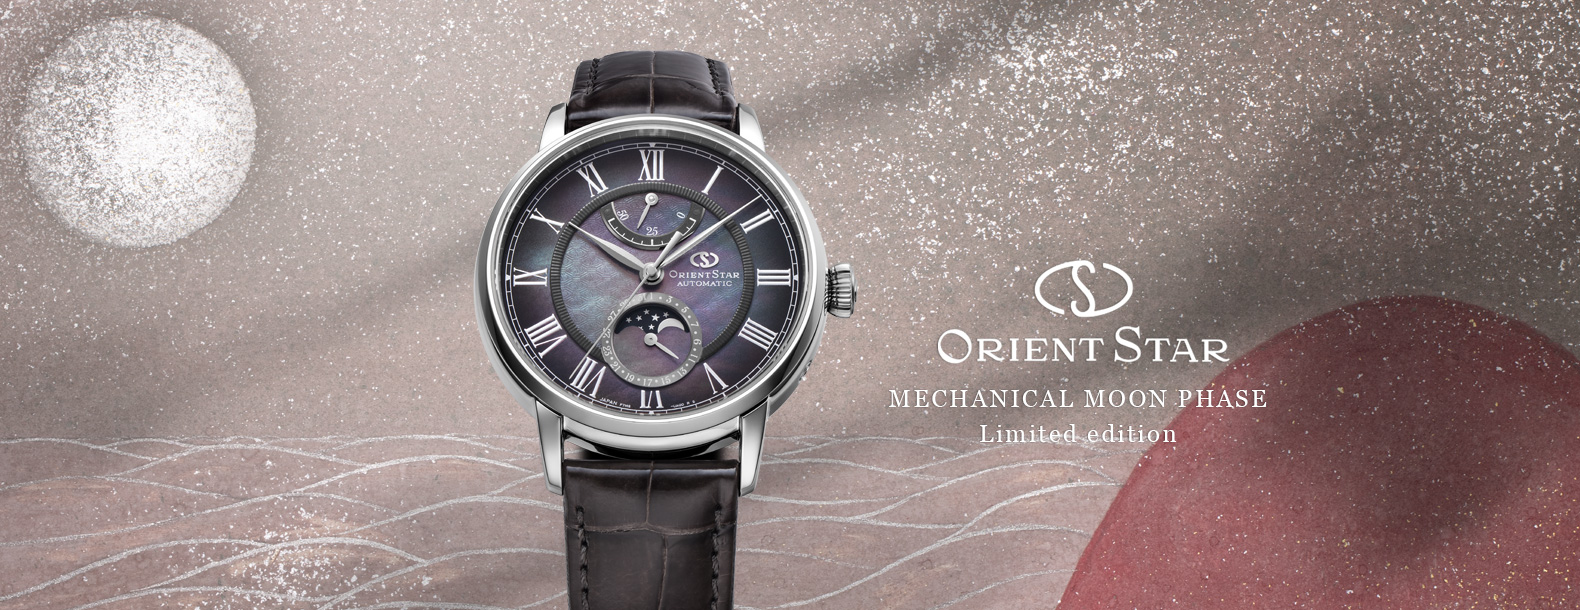 ORIENT STAR／MECHANICAL MOON PHASE